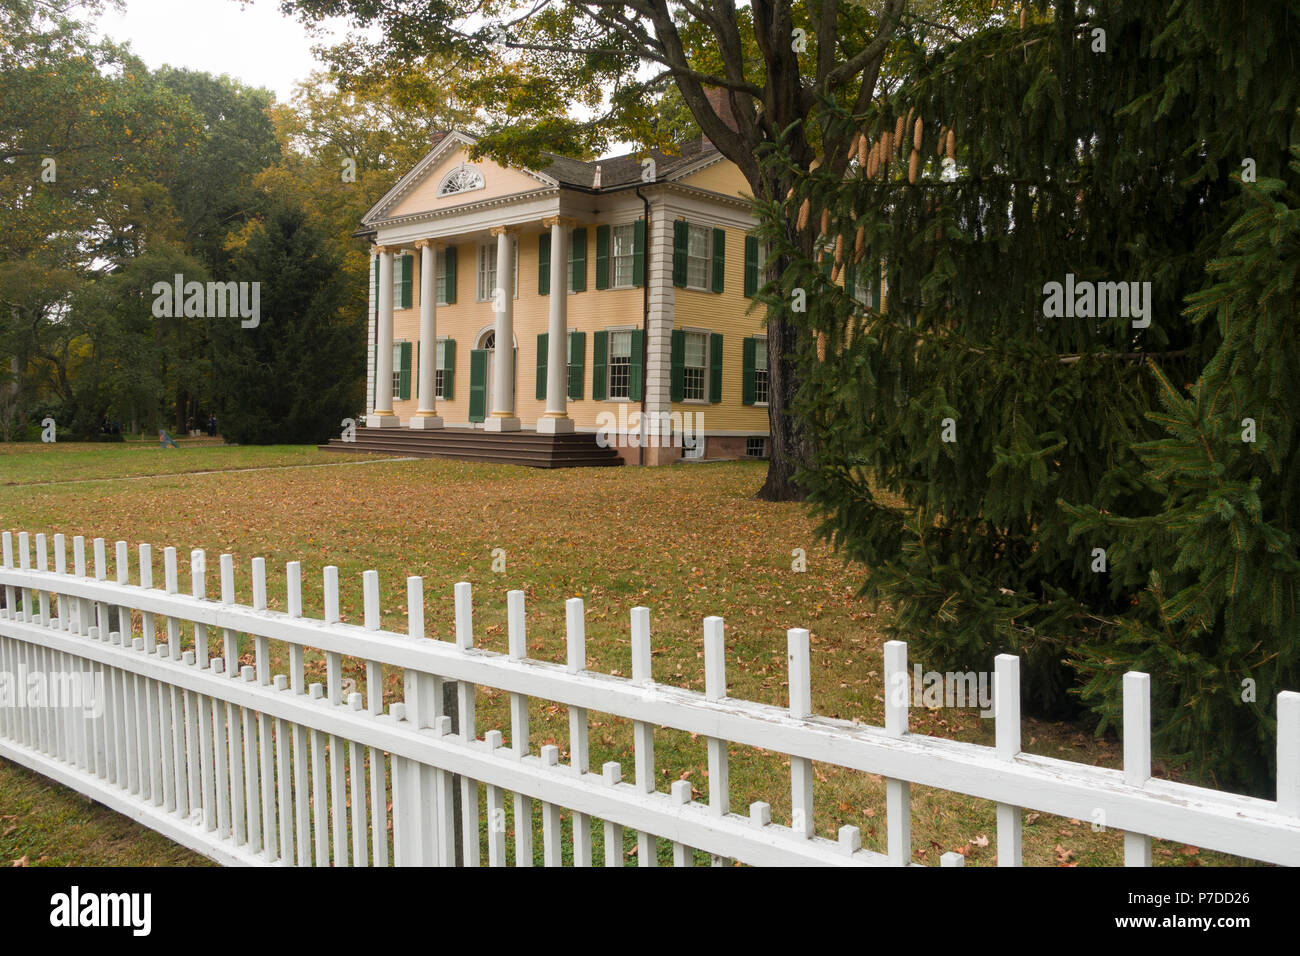 Firenze Griswold Museum di Old Lyme CT Foto Stock